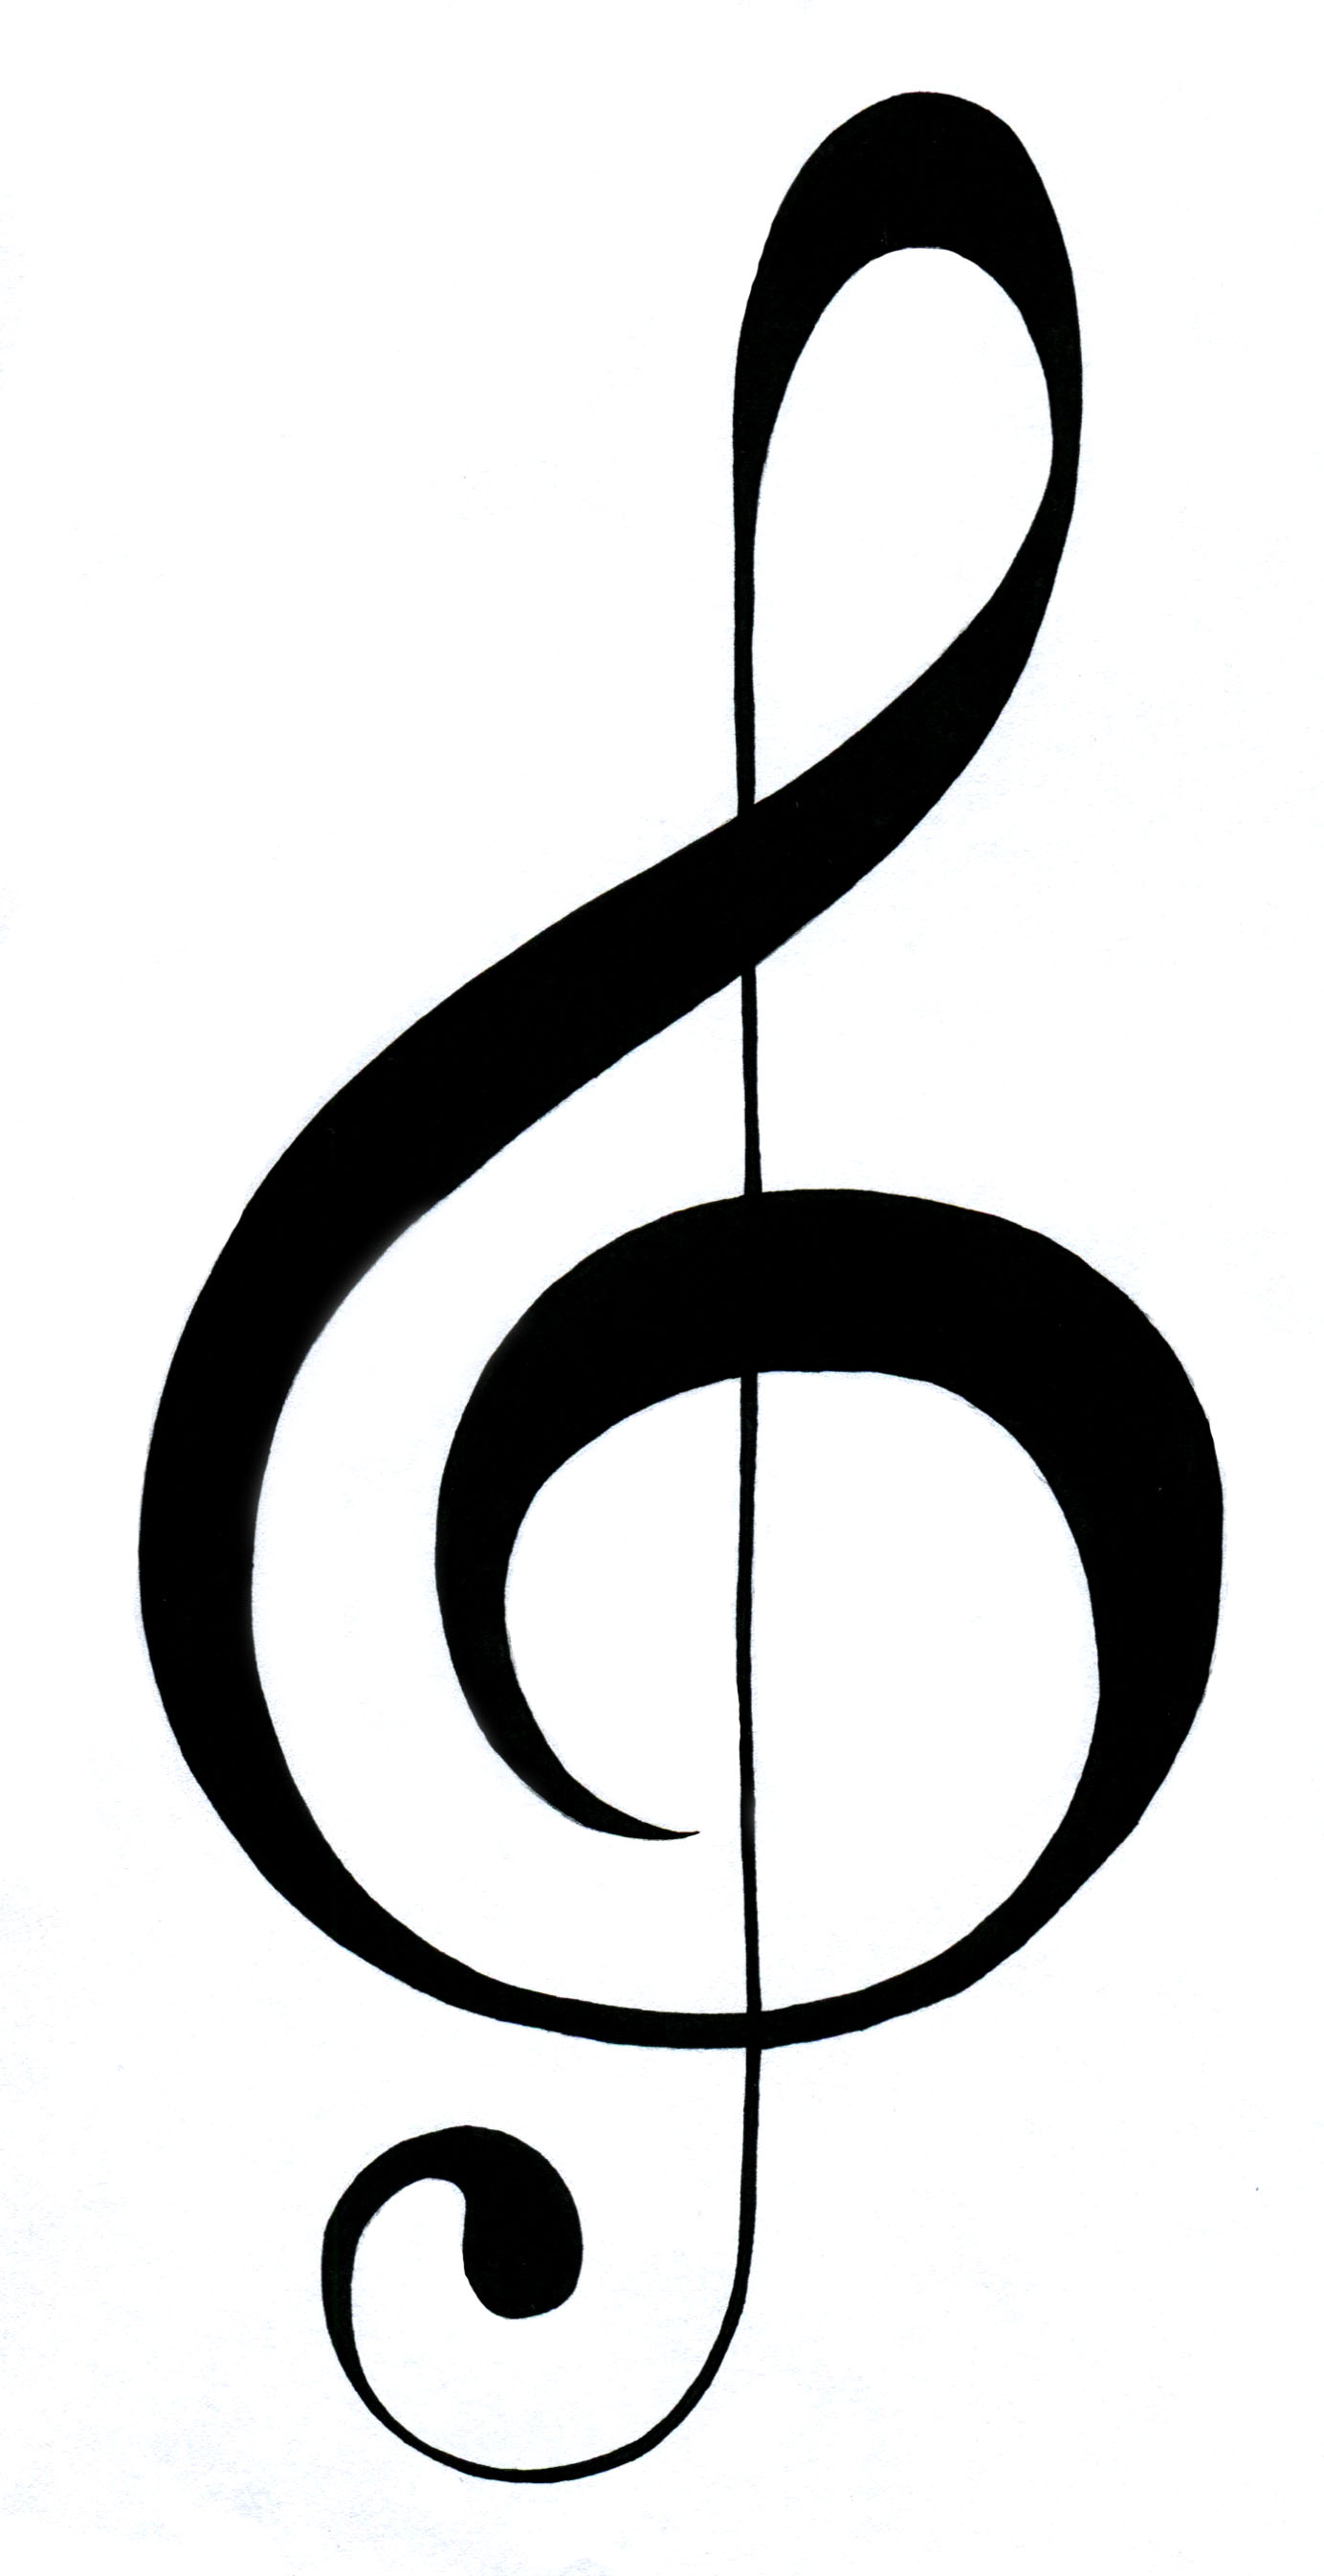 34 Treble Clef Image Free Cliparts That You Can Download To You